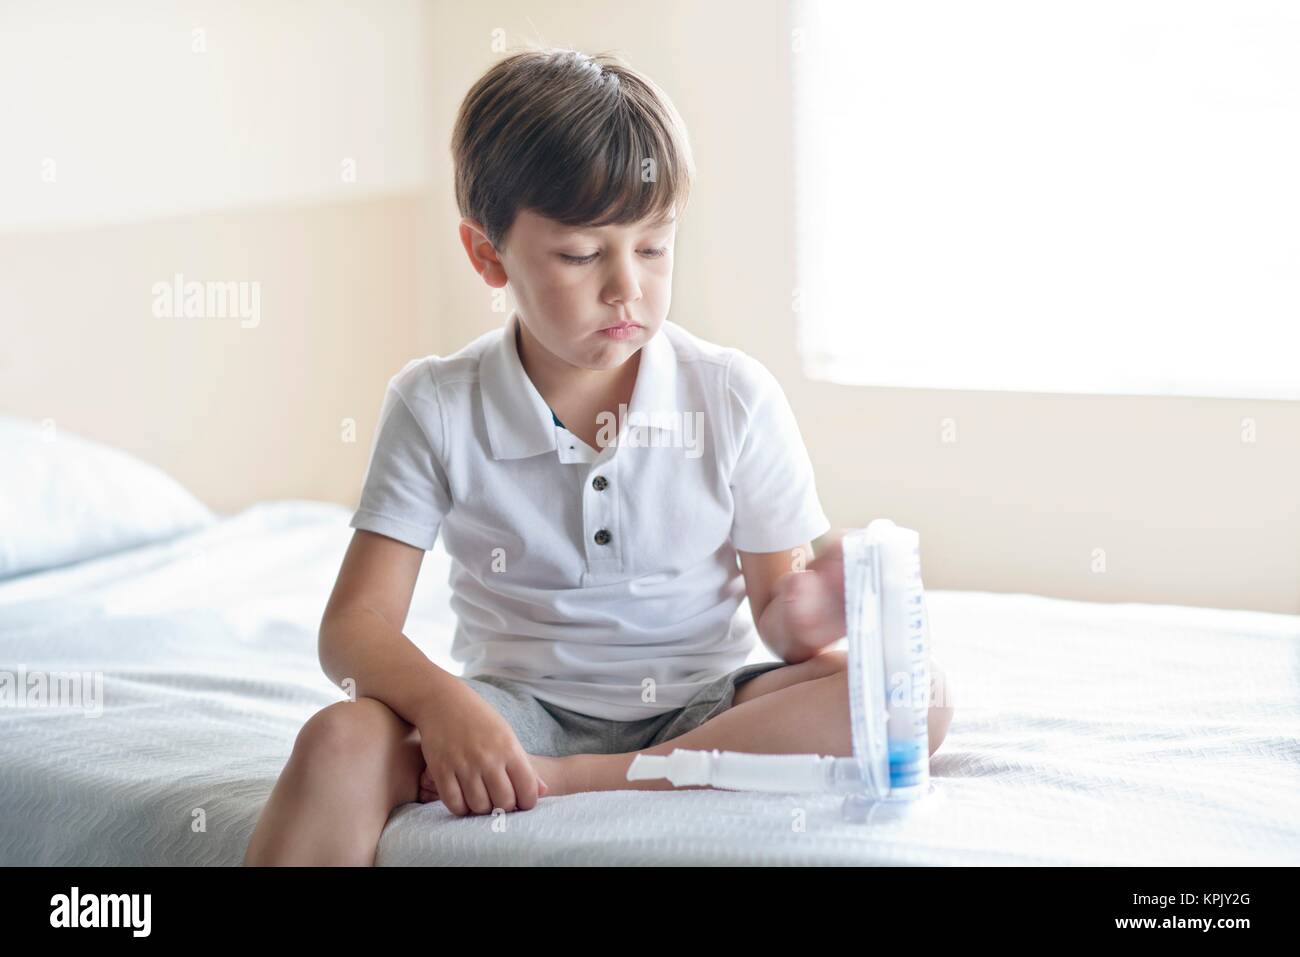 Young boy sitting on hospital bed with breathing equipment. Stock Photo